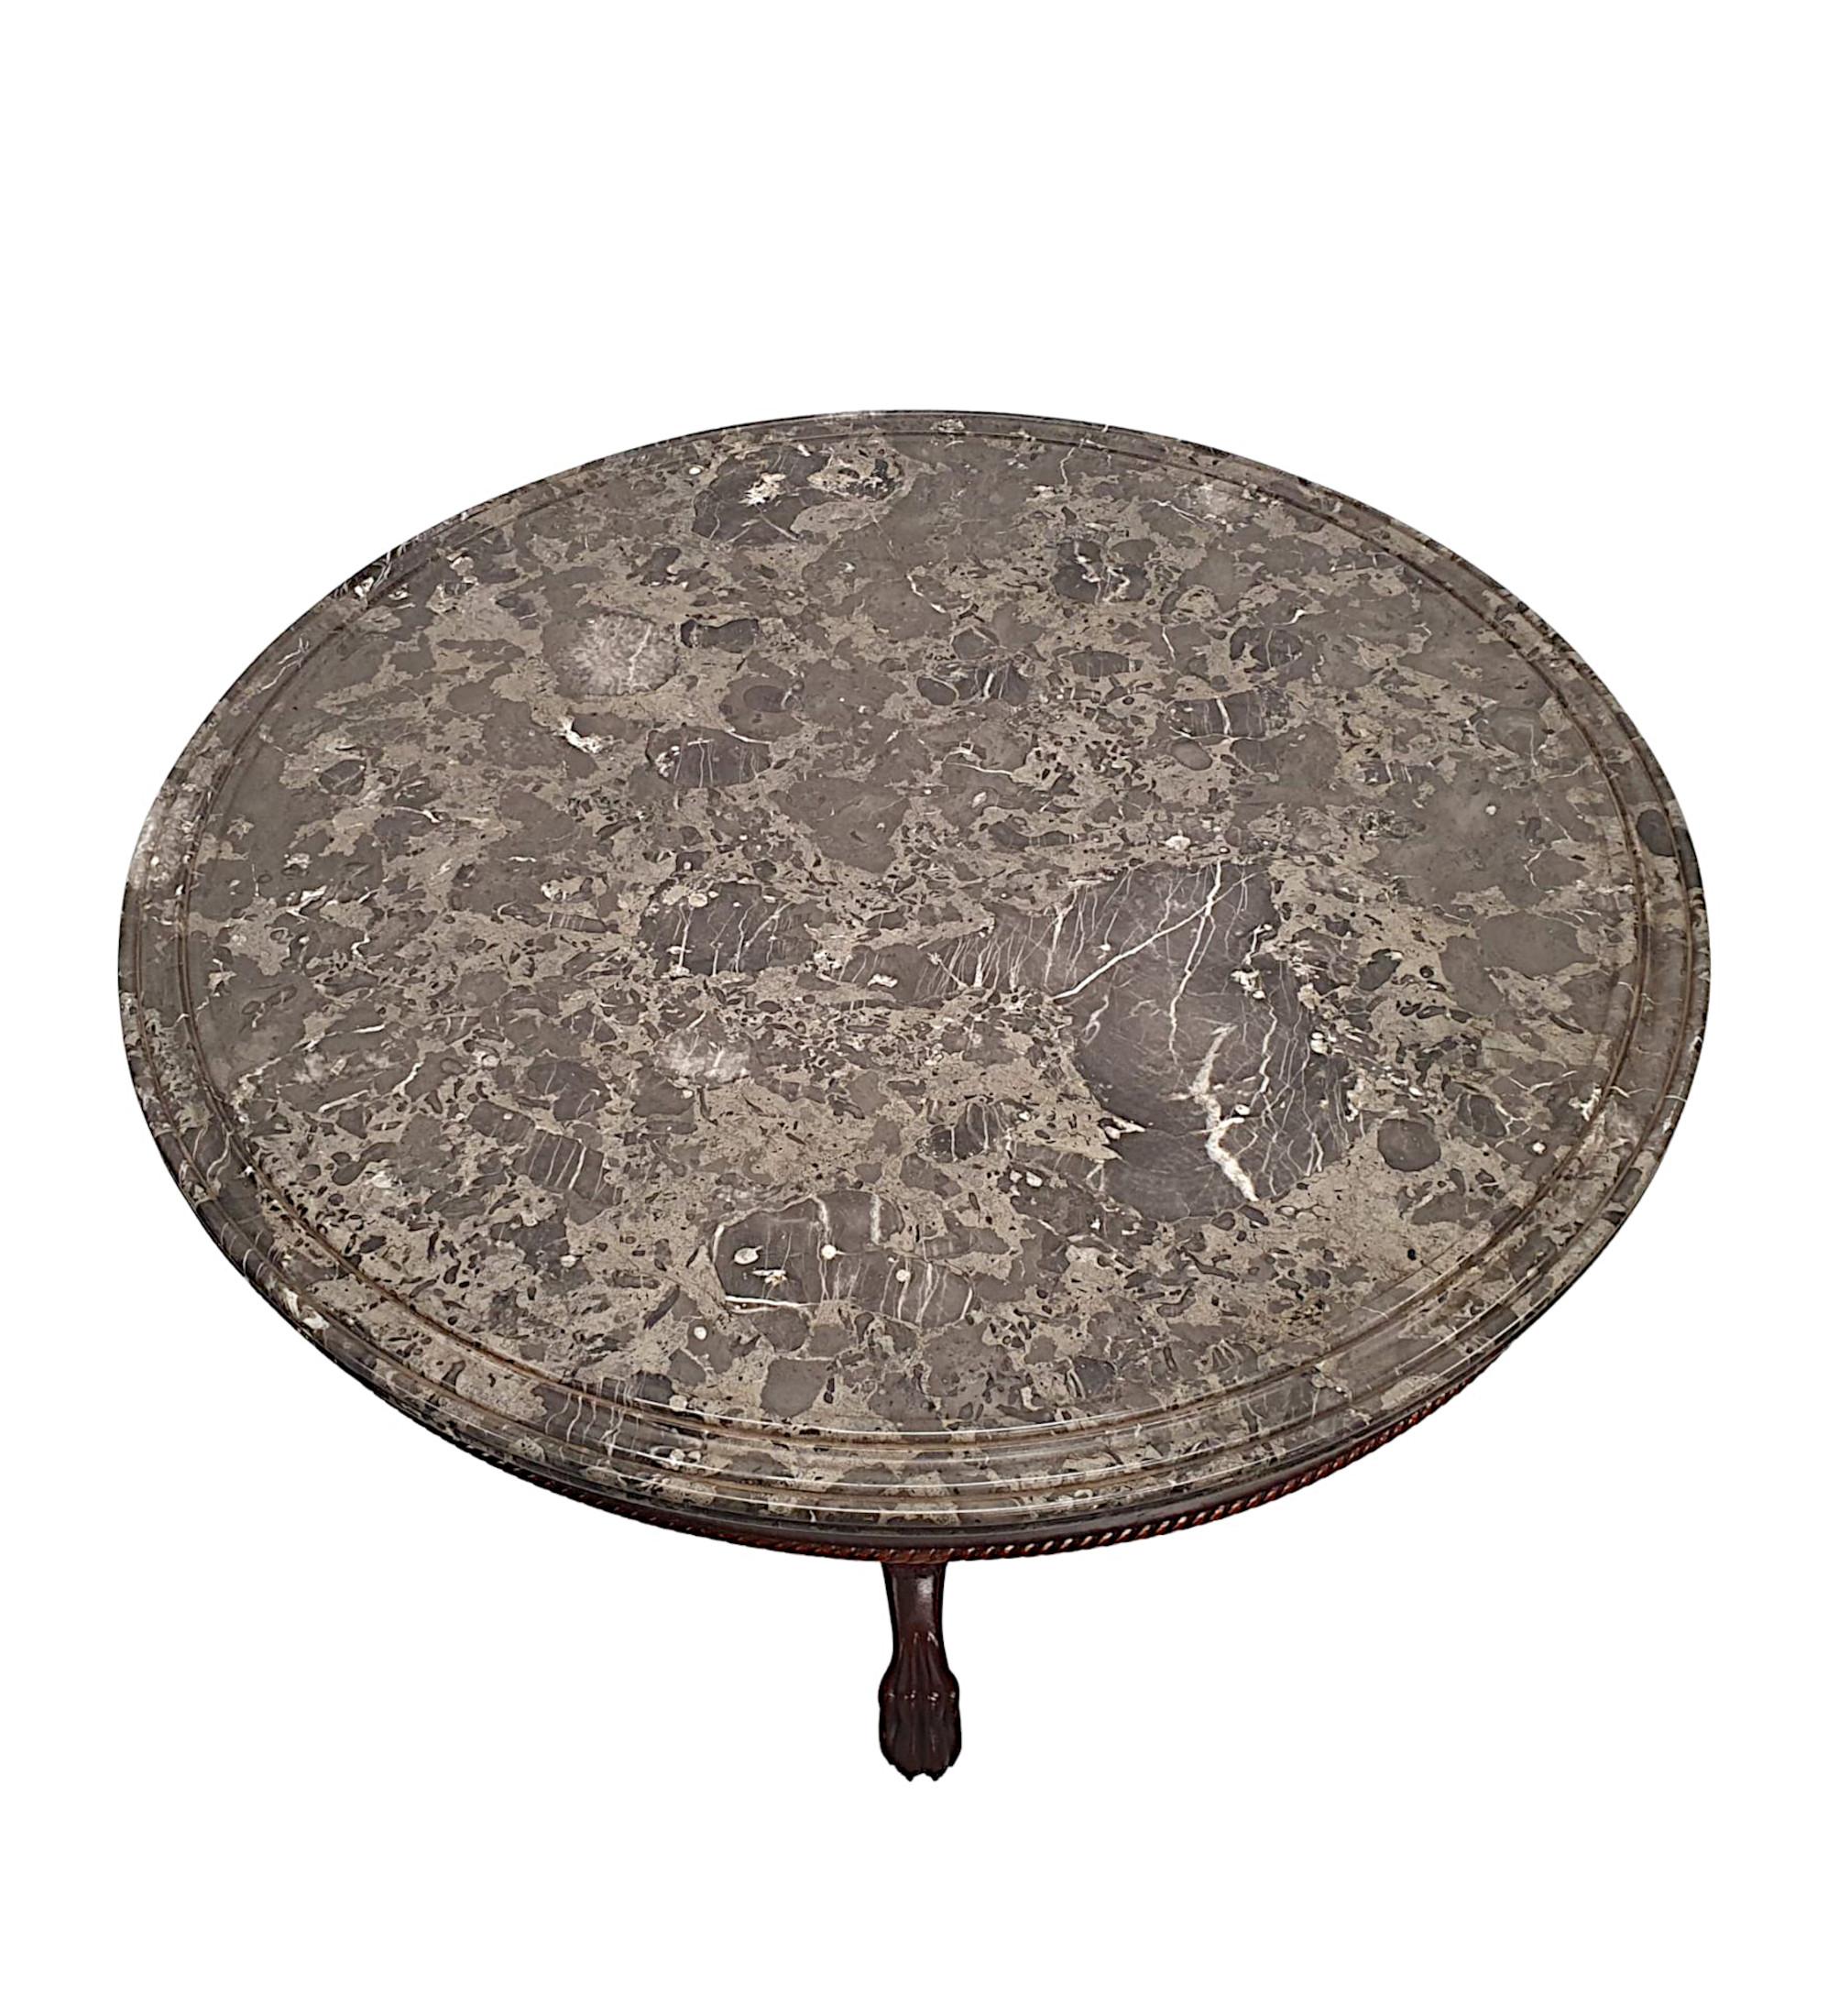 A very fine 19th century mahogany marble top centre table, of fantastic quality and finely hand carved with beautifully rich patination and grain. The gorgeous moulded and fluted emperador marble top of circular form with concentric ring detail to